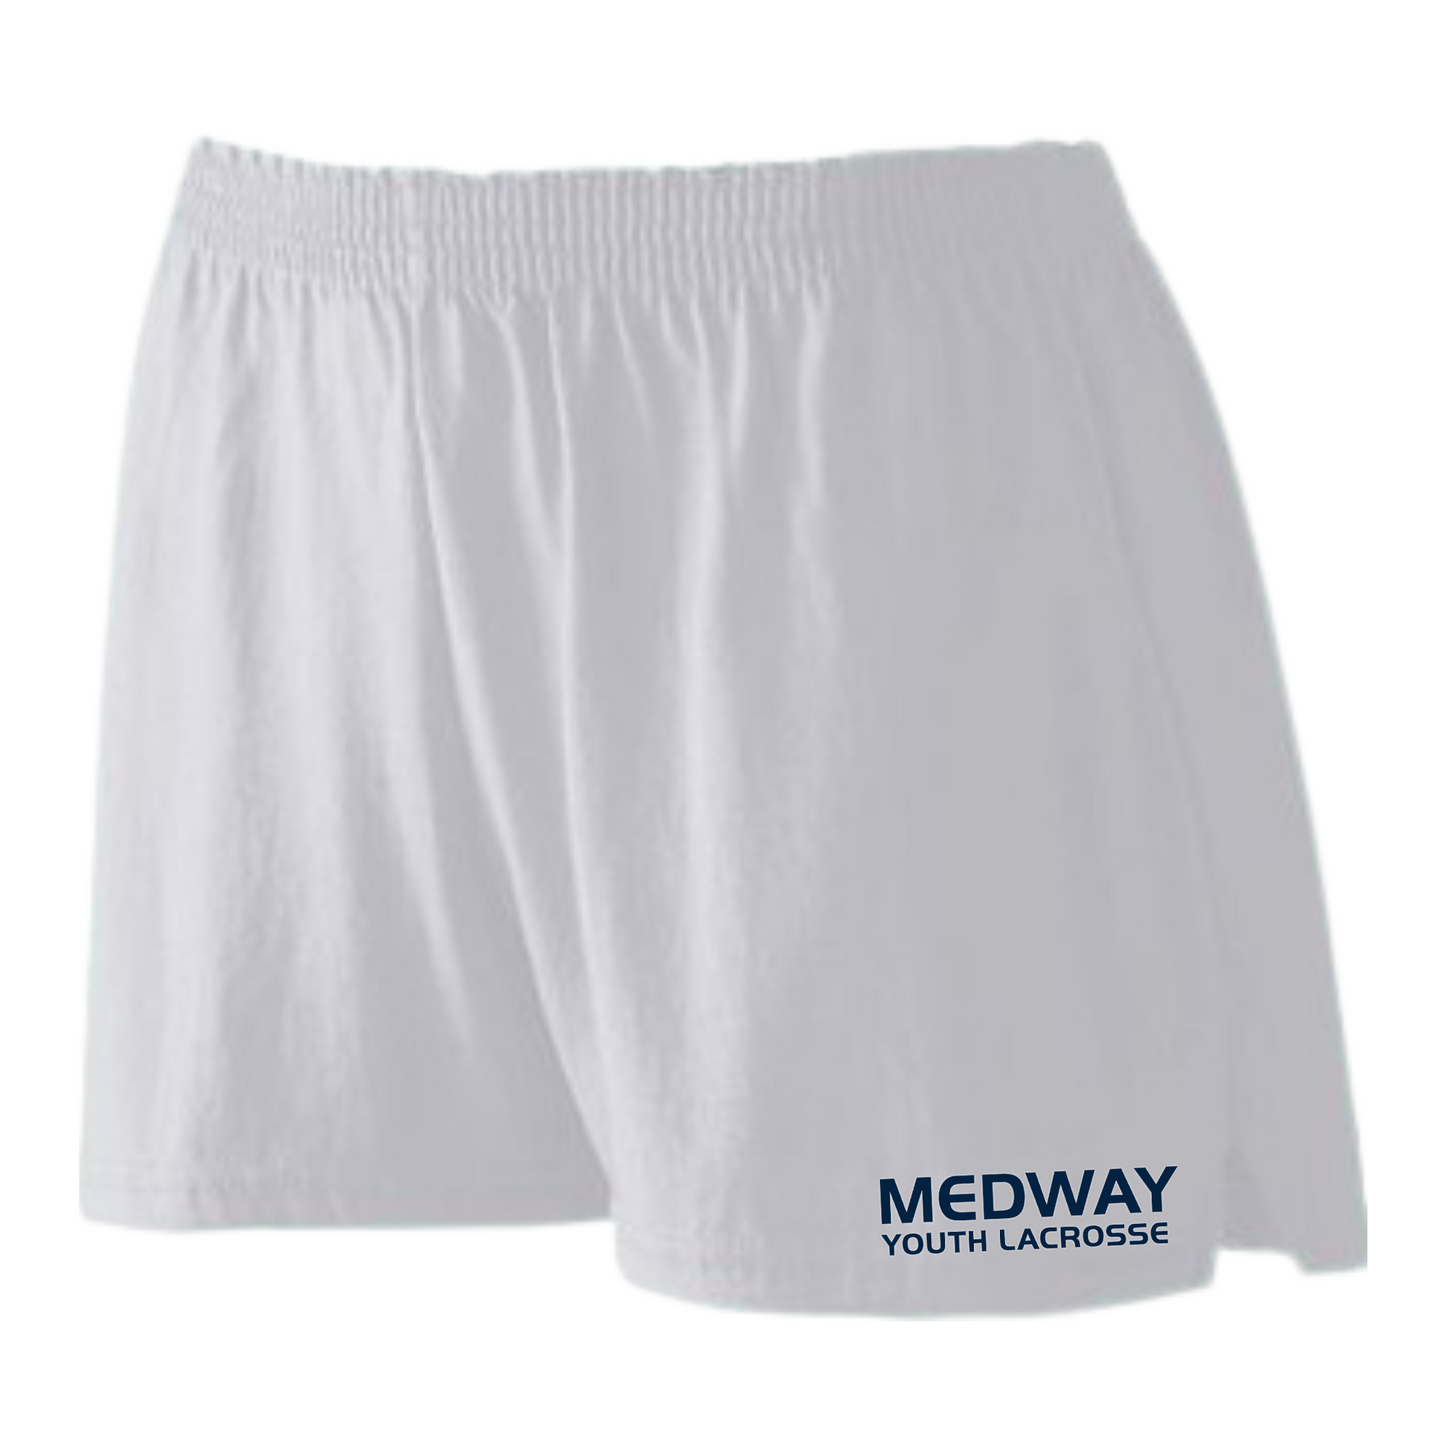 MEDWAY YOUTH LACROSSE GIRLS TRIM FIT JERSEY SHORTS - GRAY